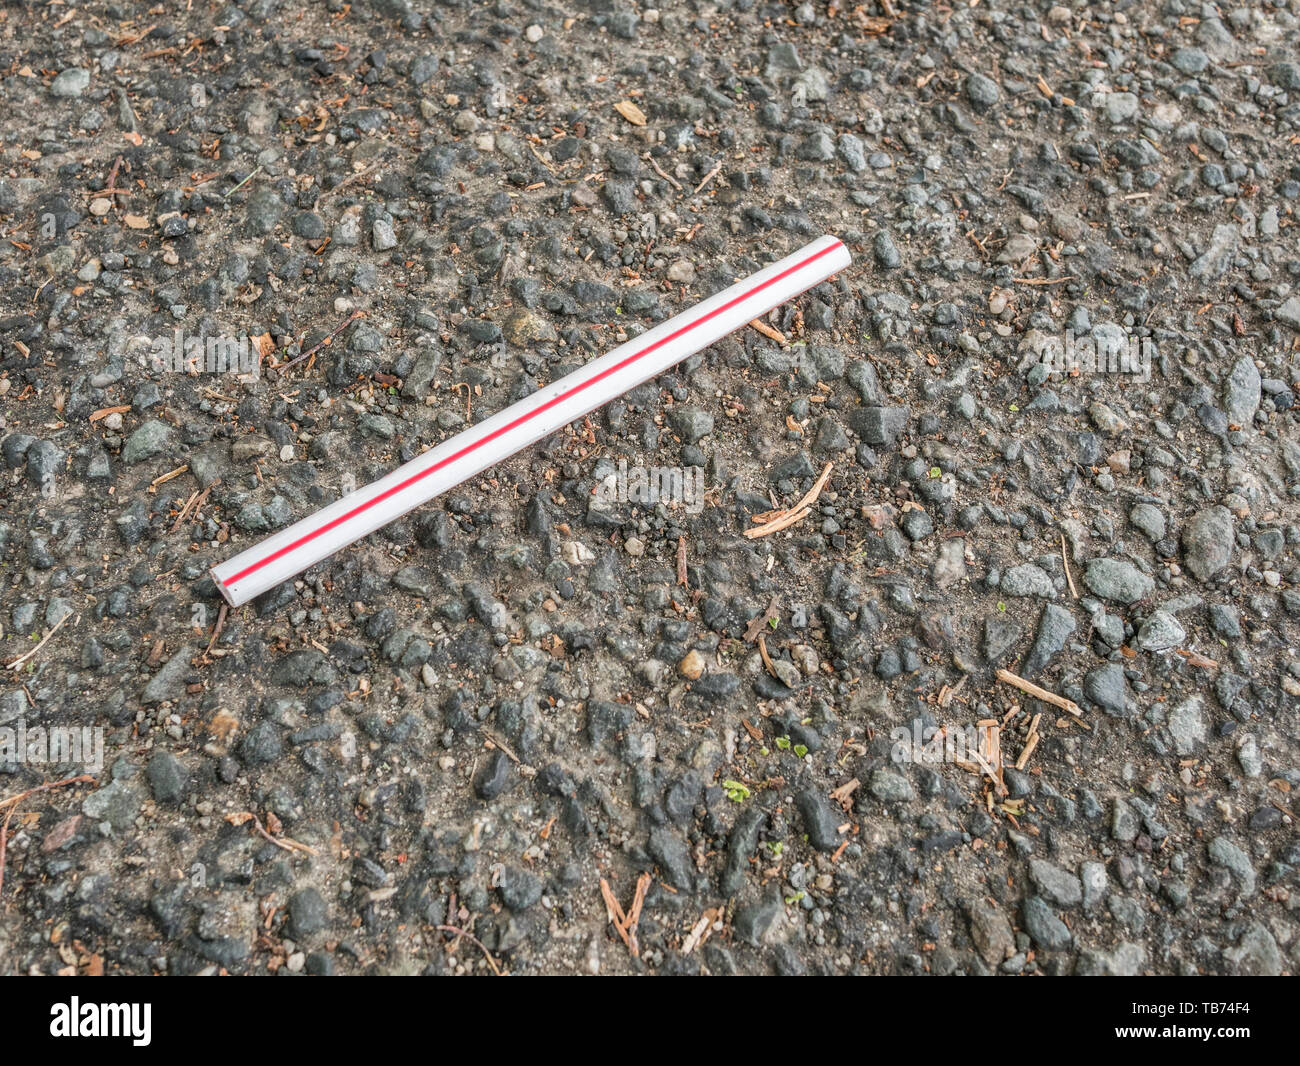 Plastic drinking straw discarded on tarmac road surface in urban area Metaphor plastic straw pollution, environmental pollution, plastic straw ban. Stock Photo